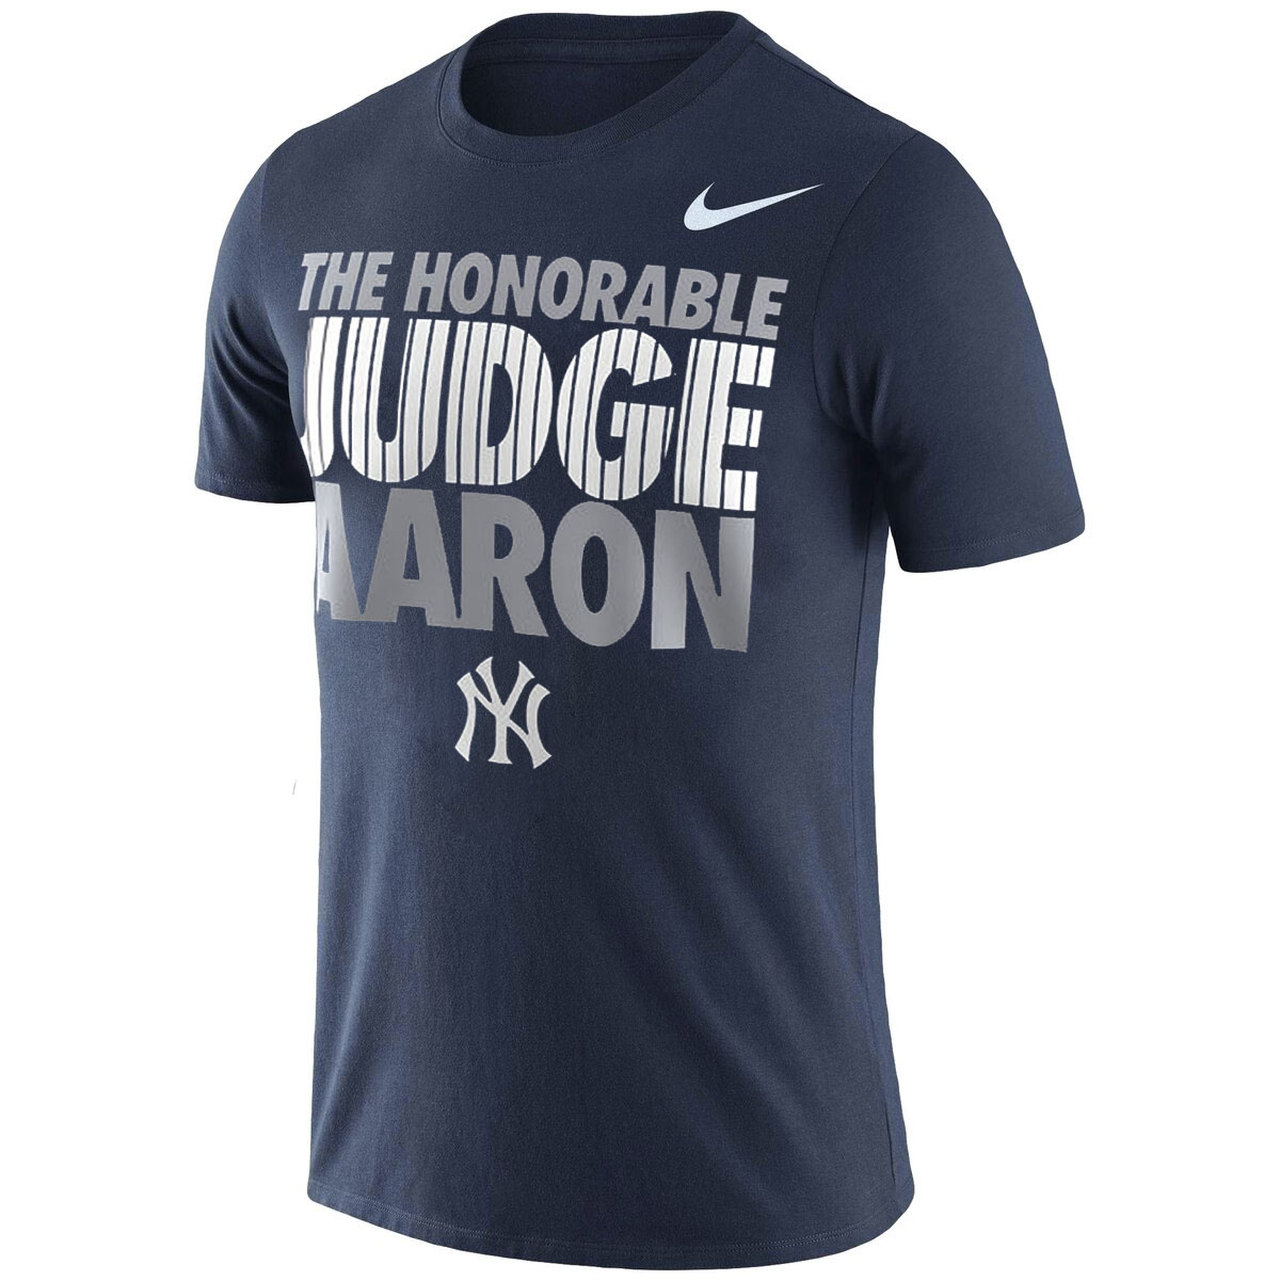 Aaron Judge Officially Licensed Mlb Apparel Pitchers T-Shirt T-Shirt